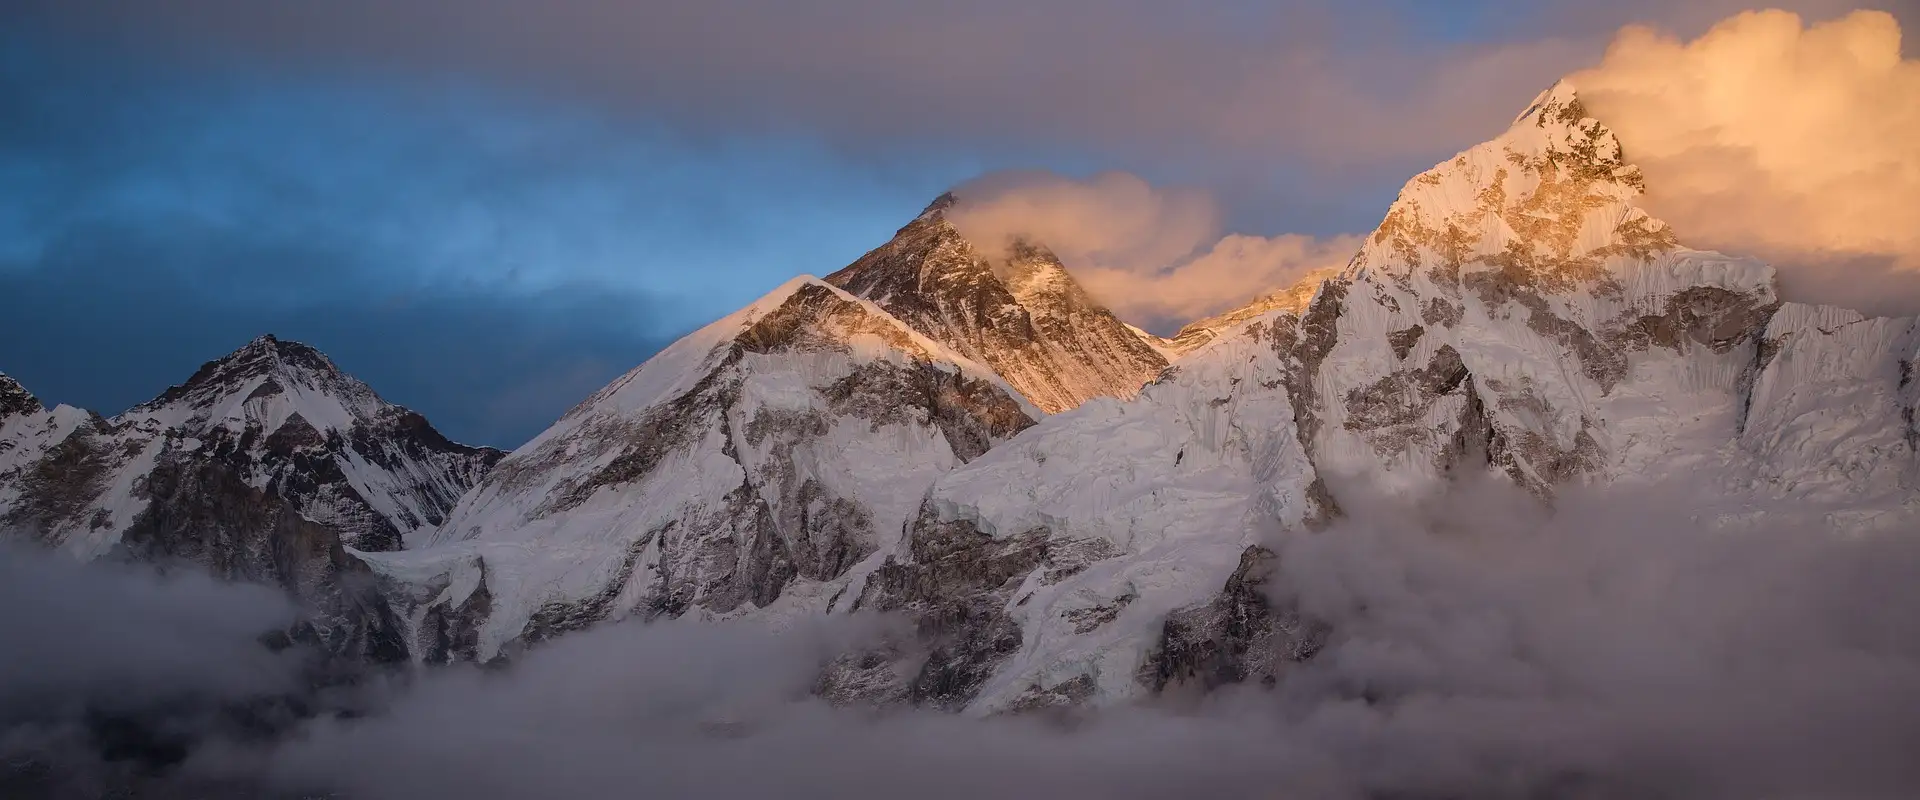 Mount Everest: 11 reasons why it's still so special